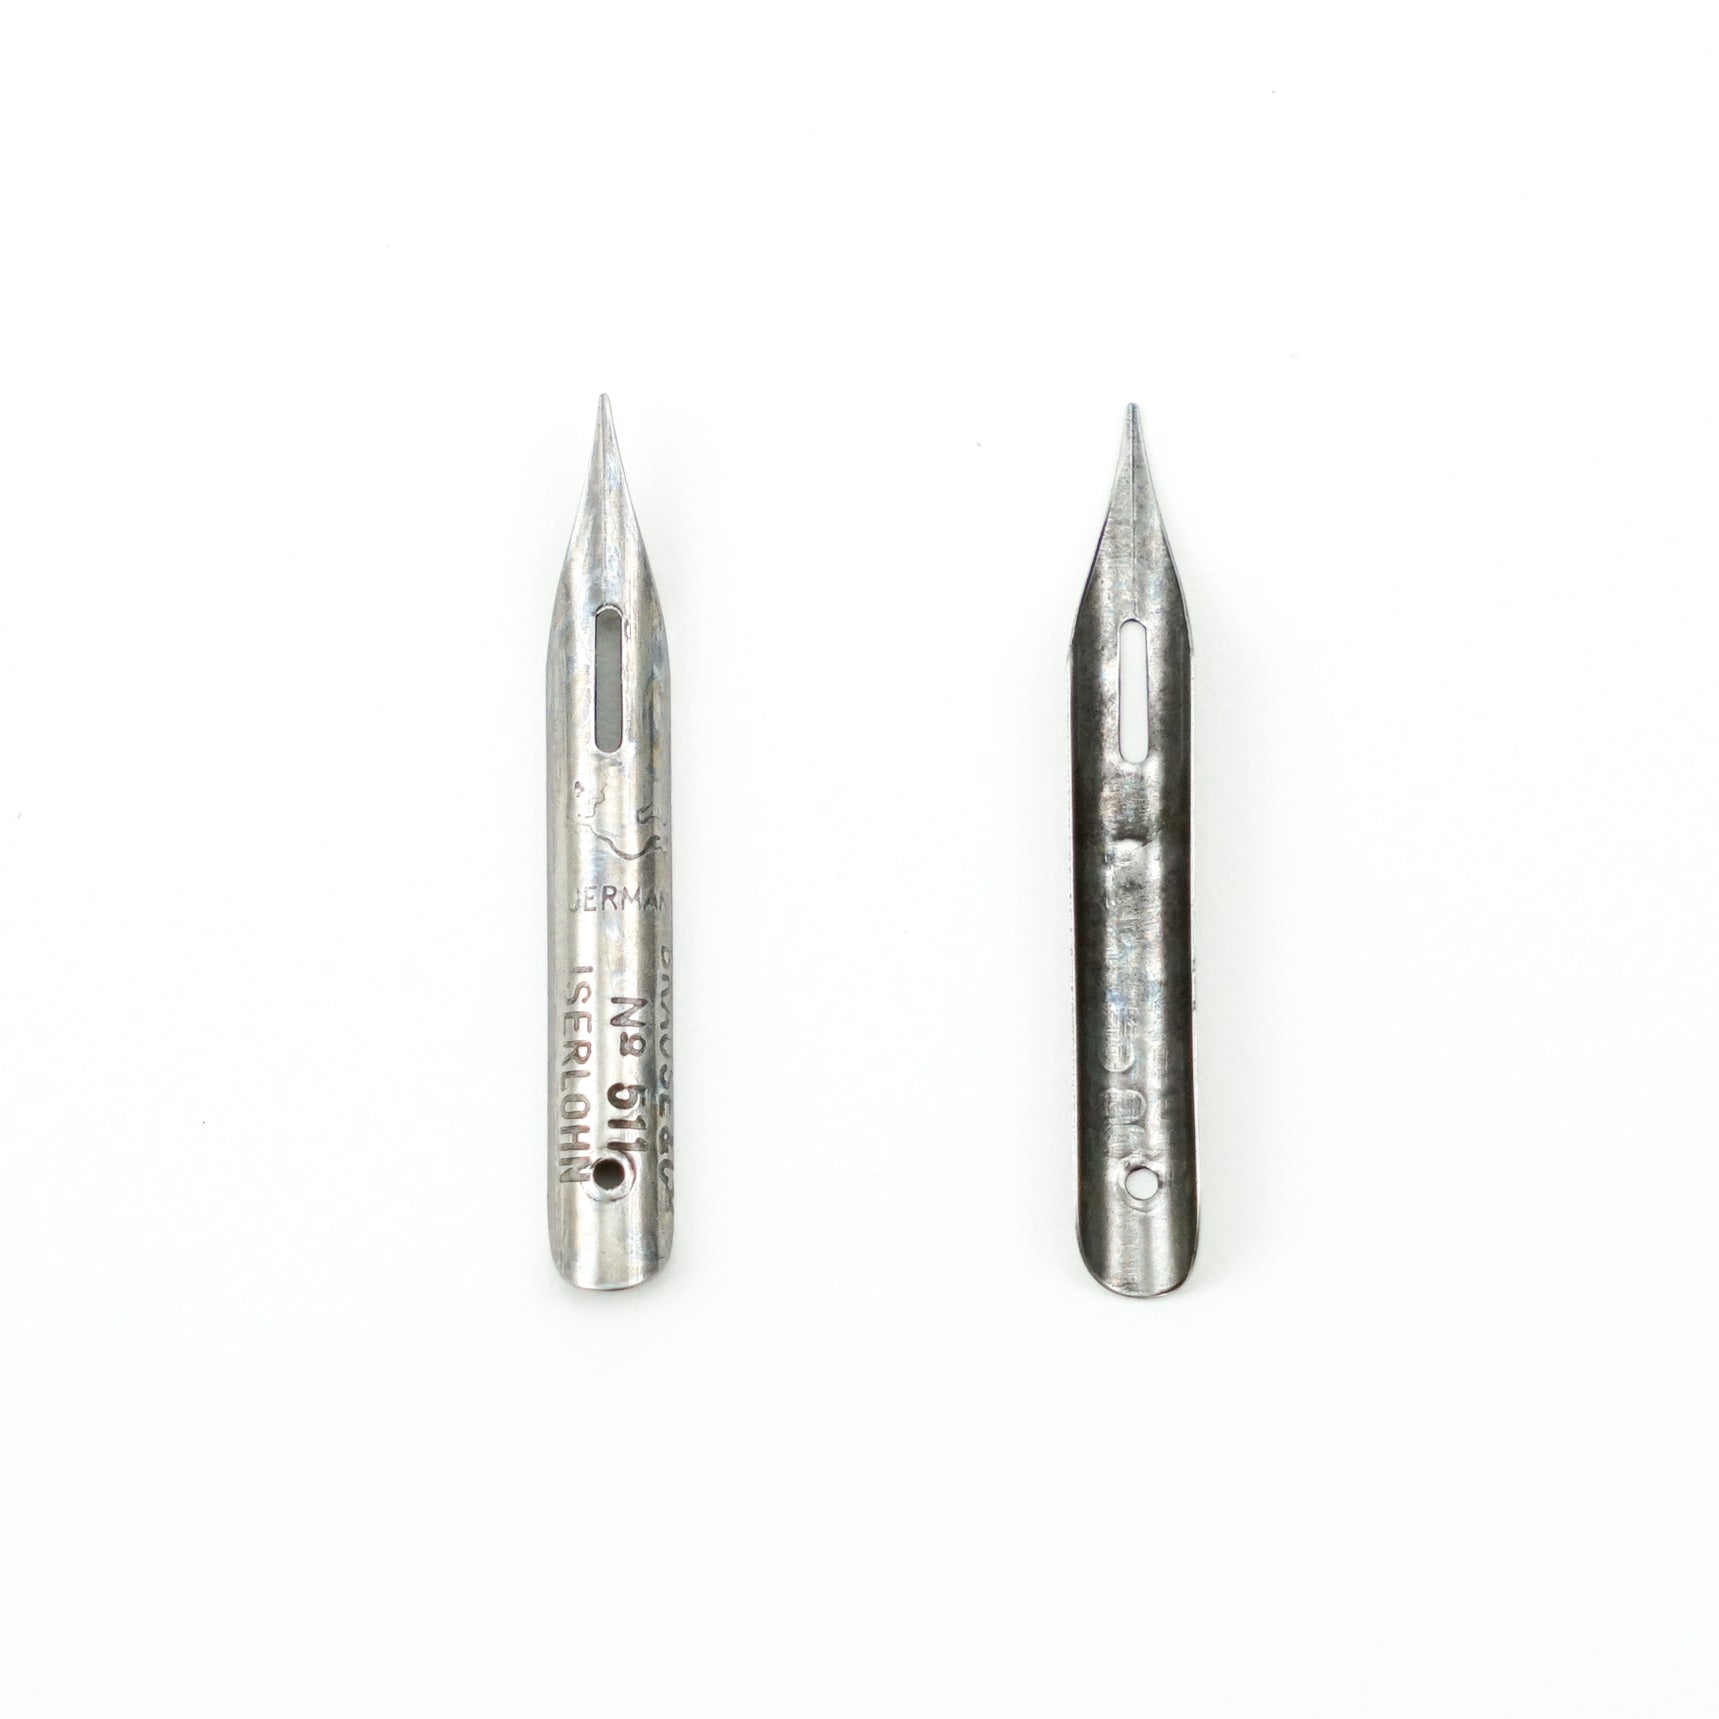 Brause 511 Drawing and Calligraphy Nibs - 2/pack - by Brause - K. A. Artist Shop